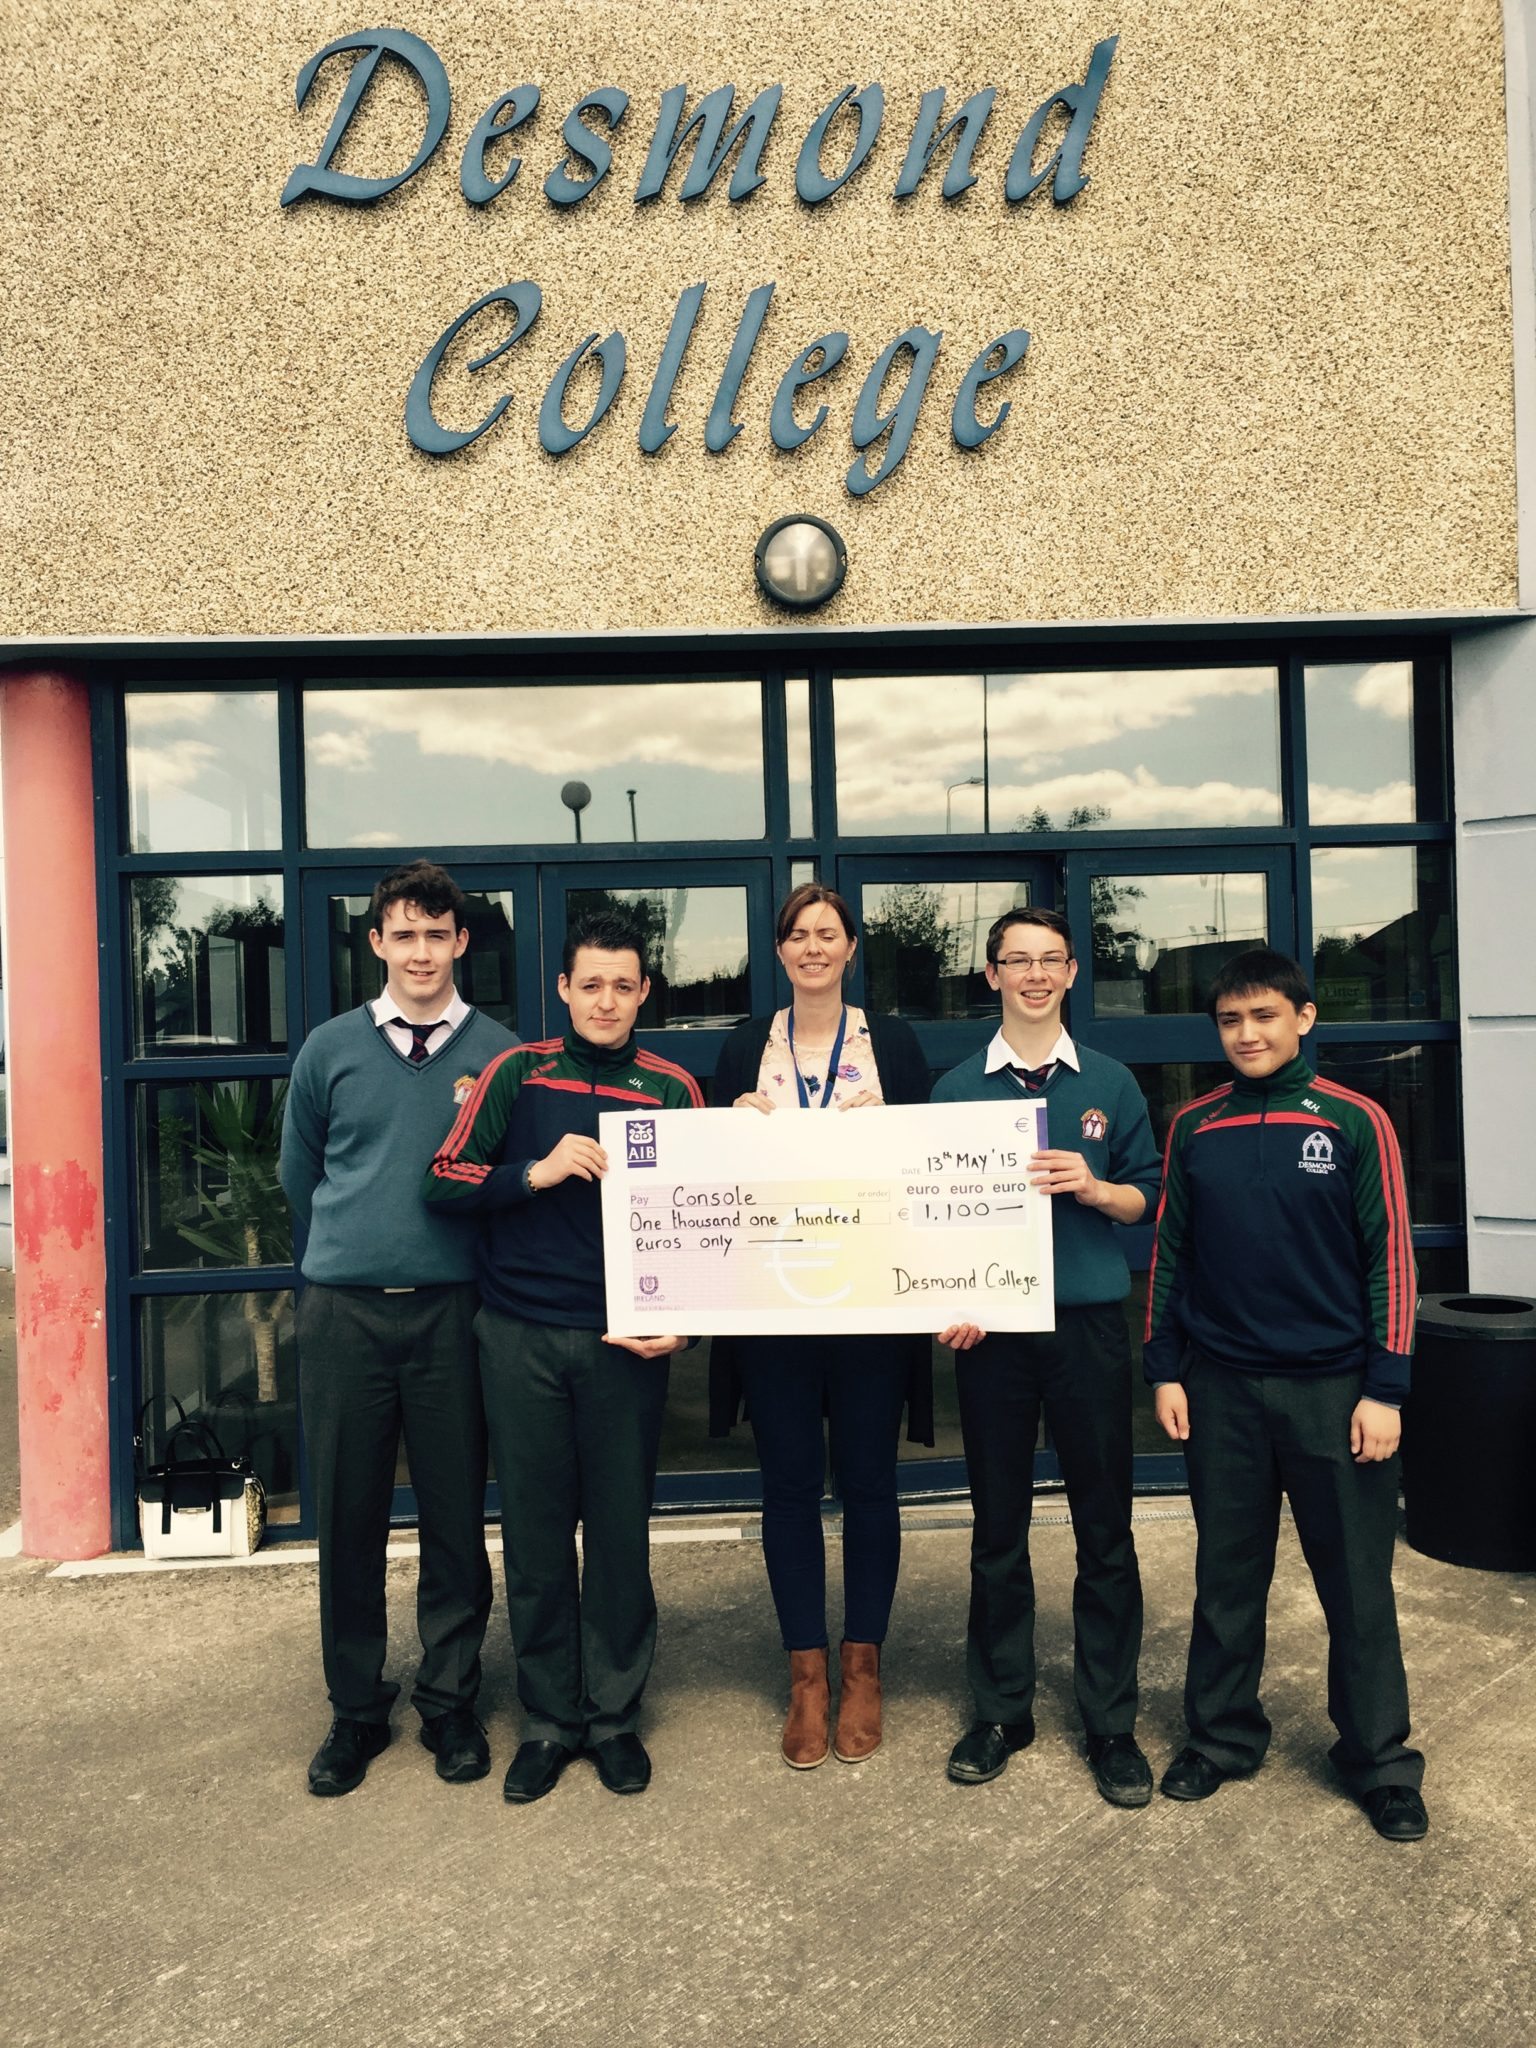 Pictured: Desmond College Transition Year Students Liam Dowling, Seán Ó Fiaich, Cillian McMahon and Matthew Halley. with Emer O'Neill (Console Limerick Centre Manager)